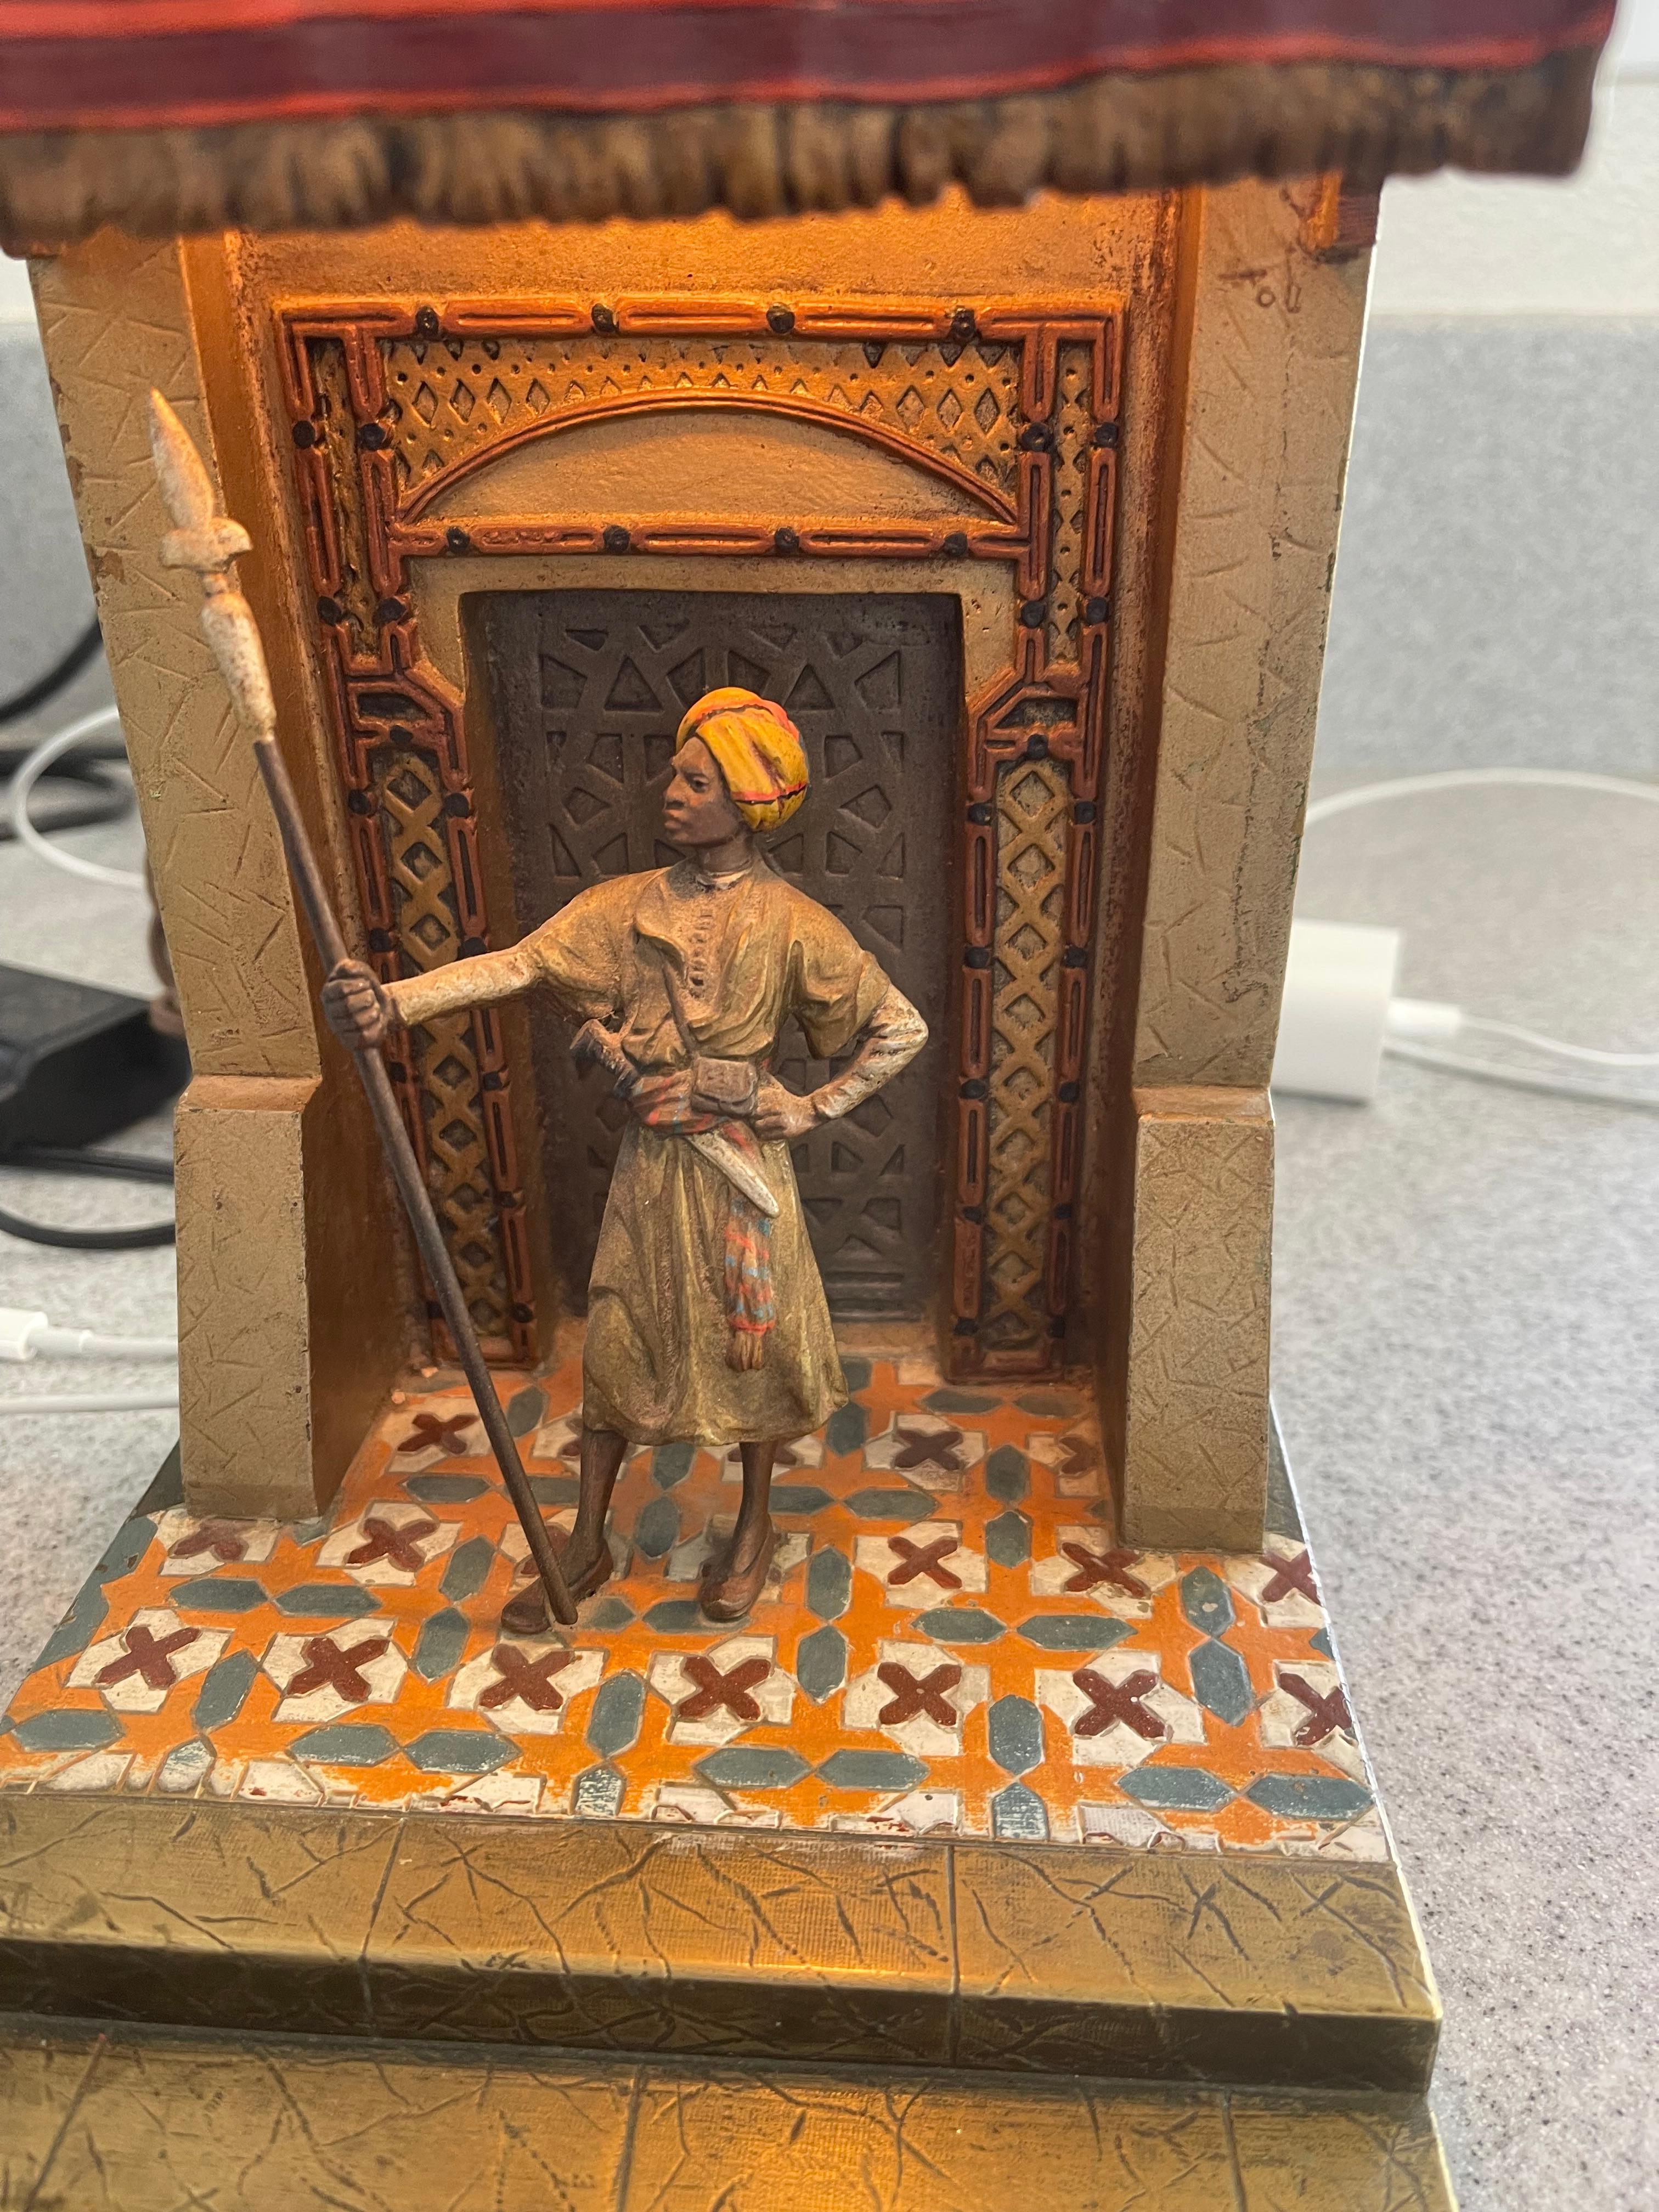 This highly detailed and colorful Vienna bronze lamp depicts a guard standing and protecting the palace. The colorful canopy and floor are just 2 of the many features that makes this one special. Artist signed 